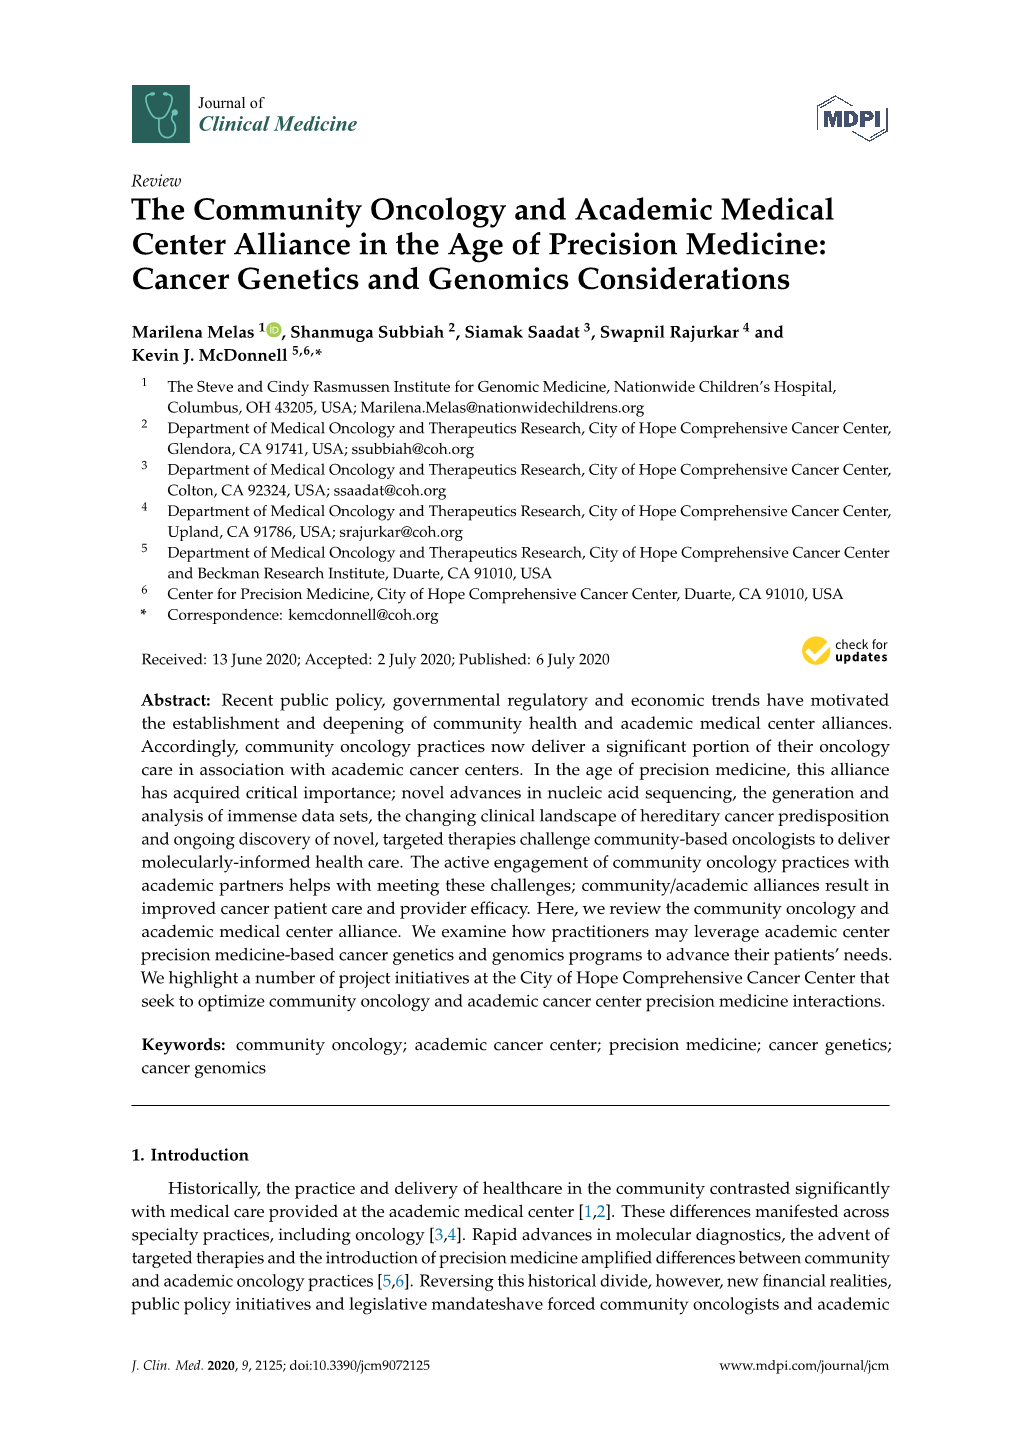 The Community Oncology and Academic Medical Center Alliance in the Age of Precision Medicine: Cancer Genetics and Genomics Considerations